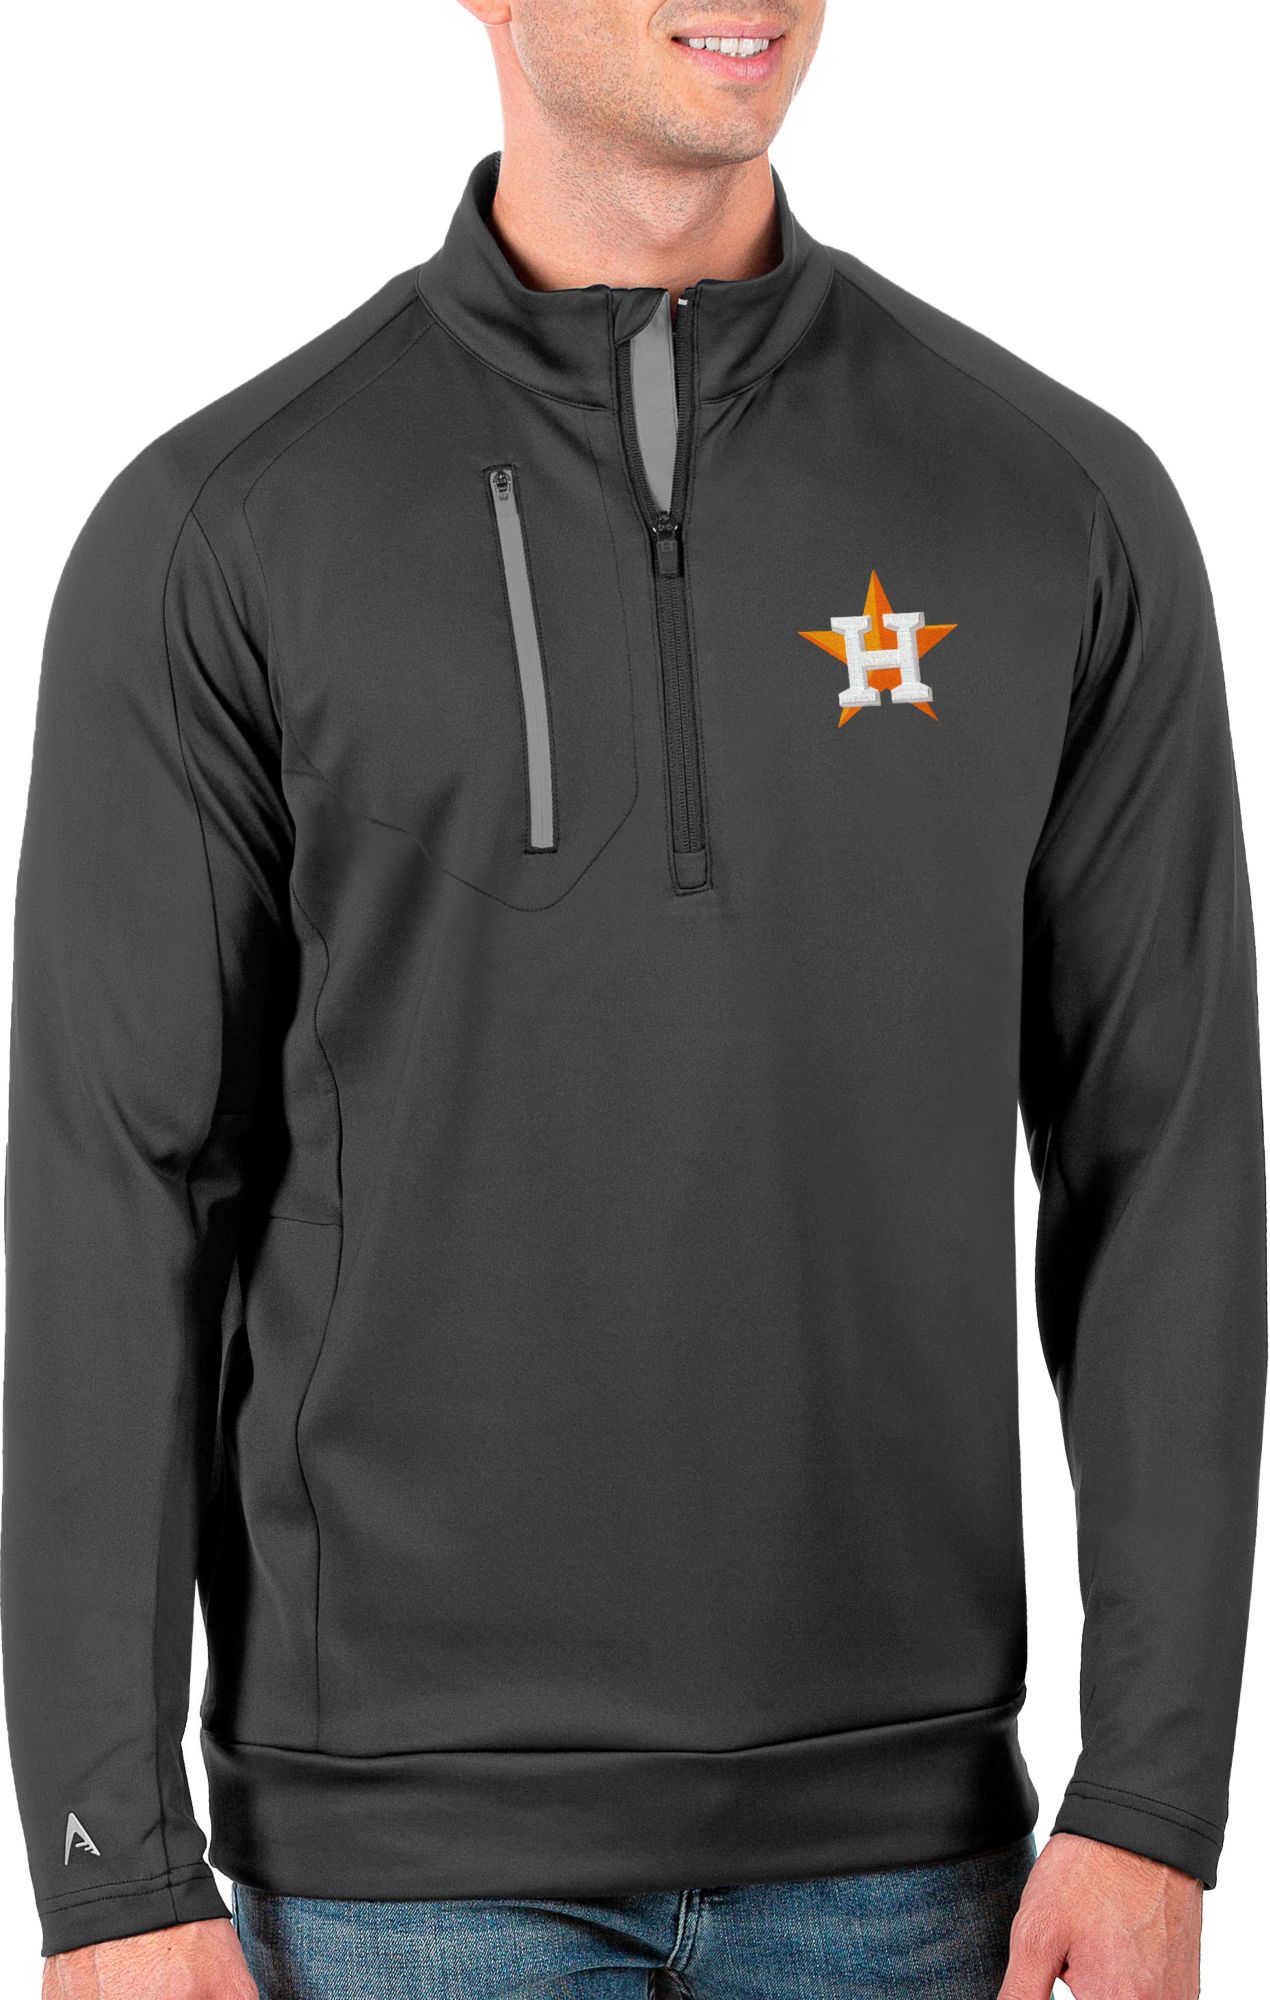 Houston Astros Women's Apparel  Curbside Pickup Available at DICK'S